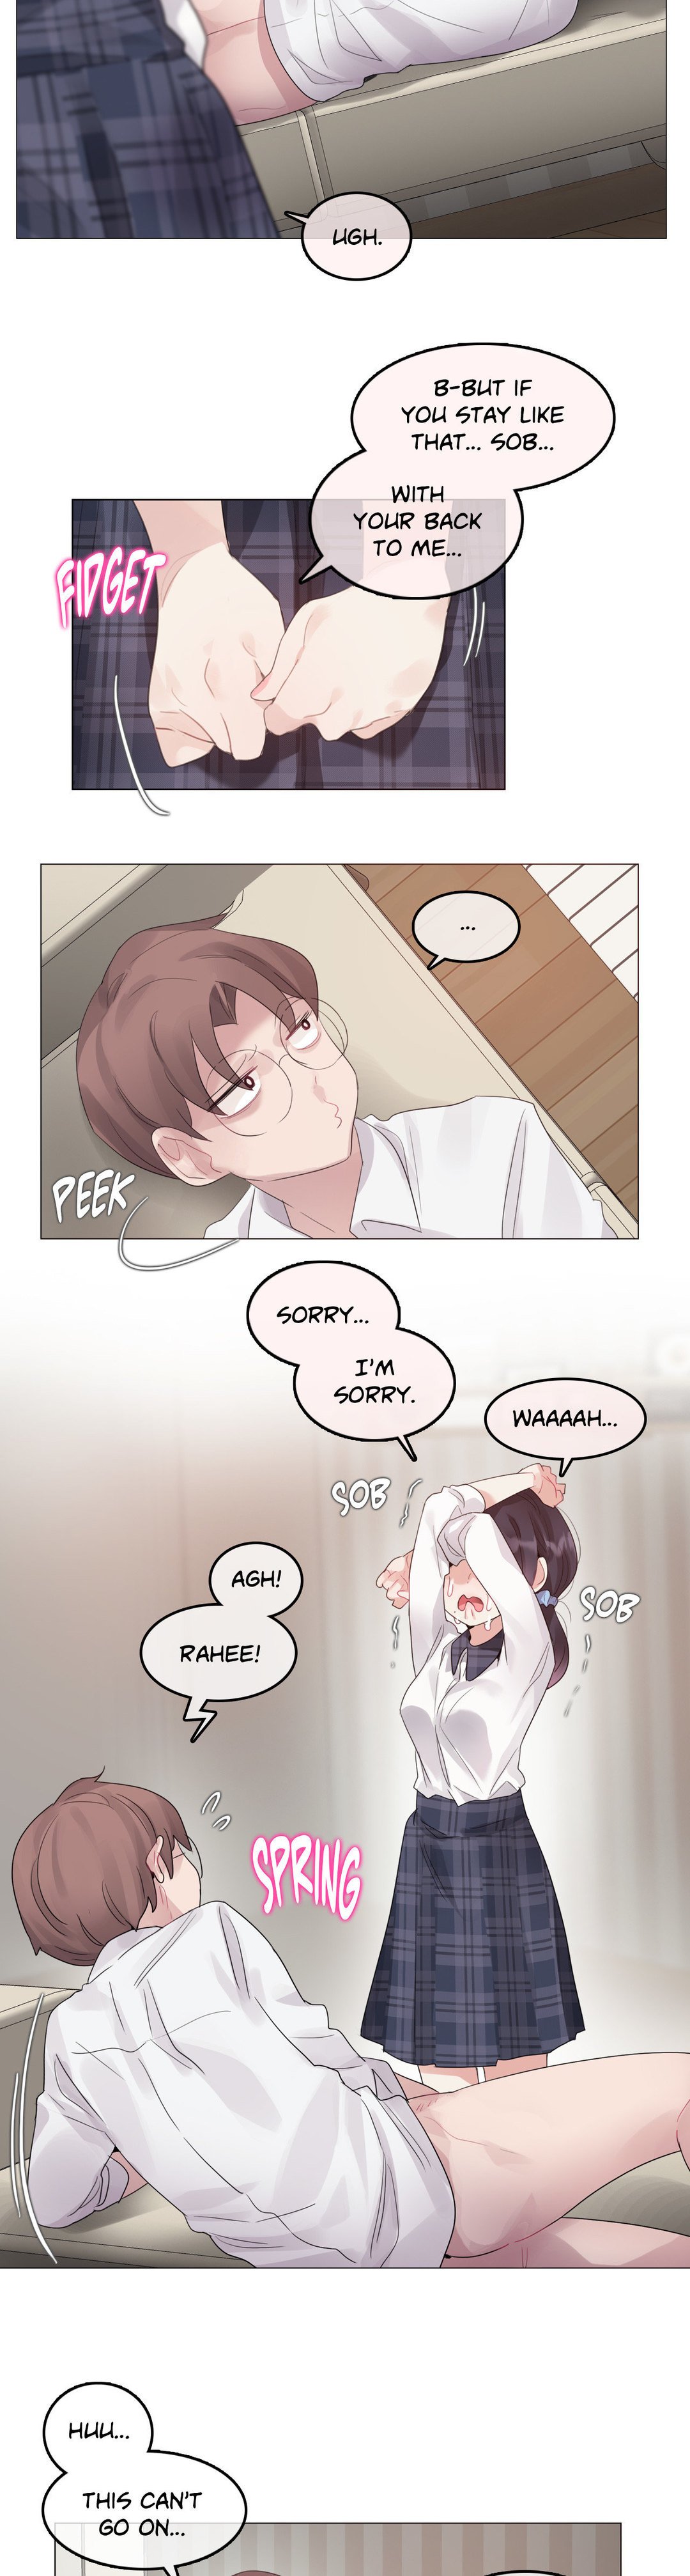 a-perverts-daily-life-chap-140-3